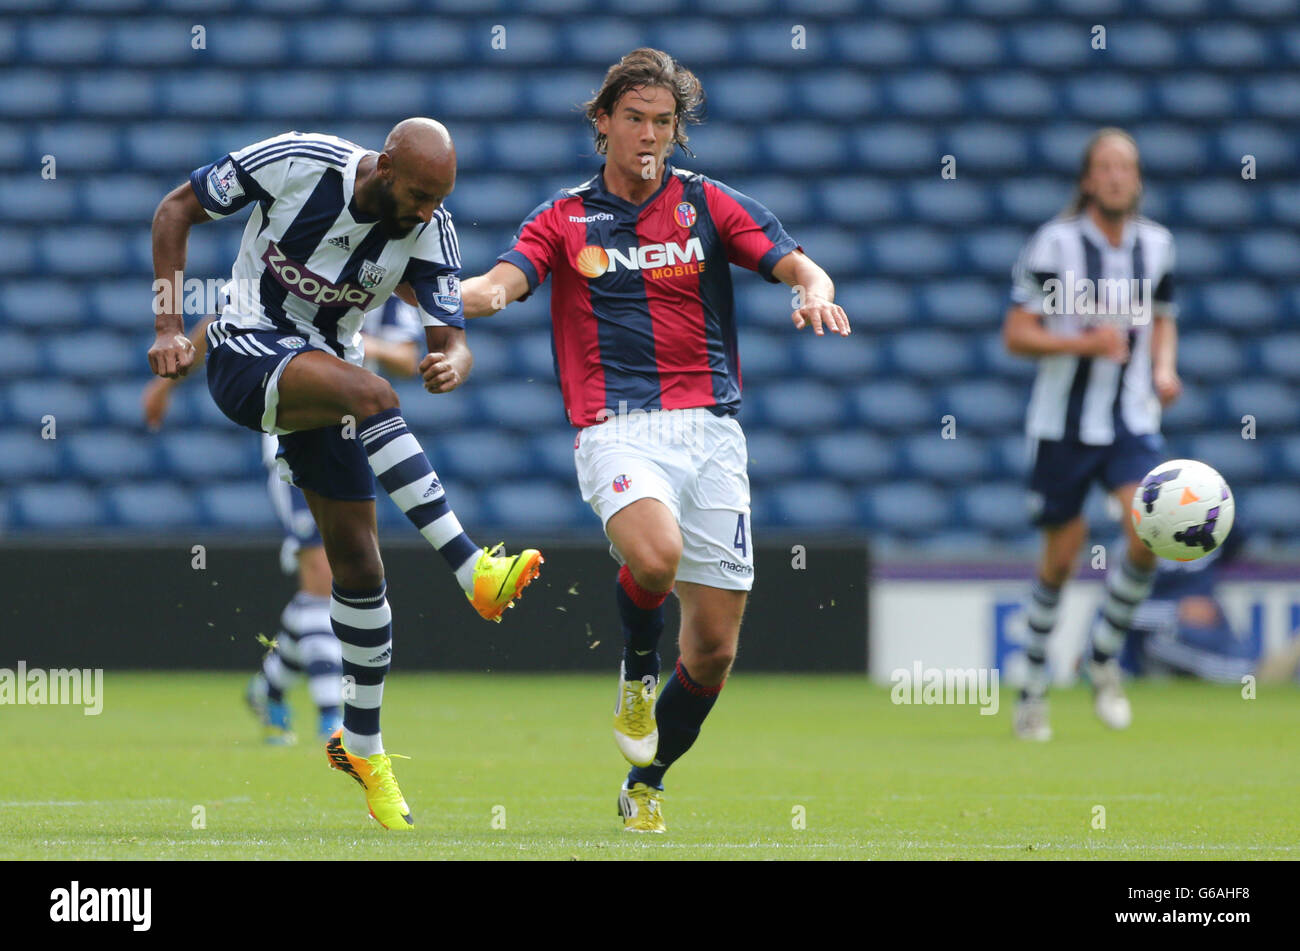 Soccer - Pre-season Friendly - West Bromwich Albion v Bologna - The Hawthorns. West Bromwich Albion's Nicolas Anelka tussles with Bologna's Rene Krhin during the Pre-season Friendly at The Hawthorns, West Bromwich. Stock Photo